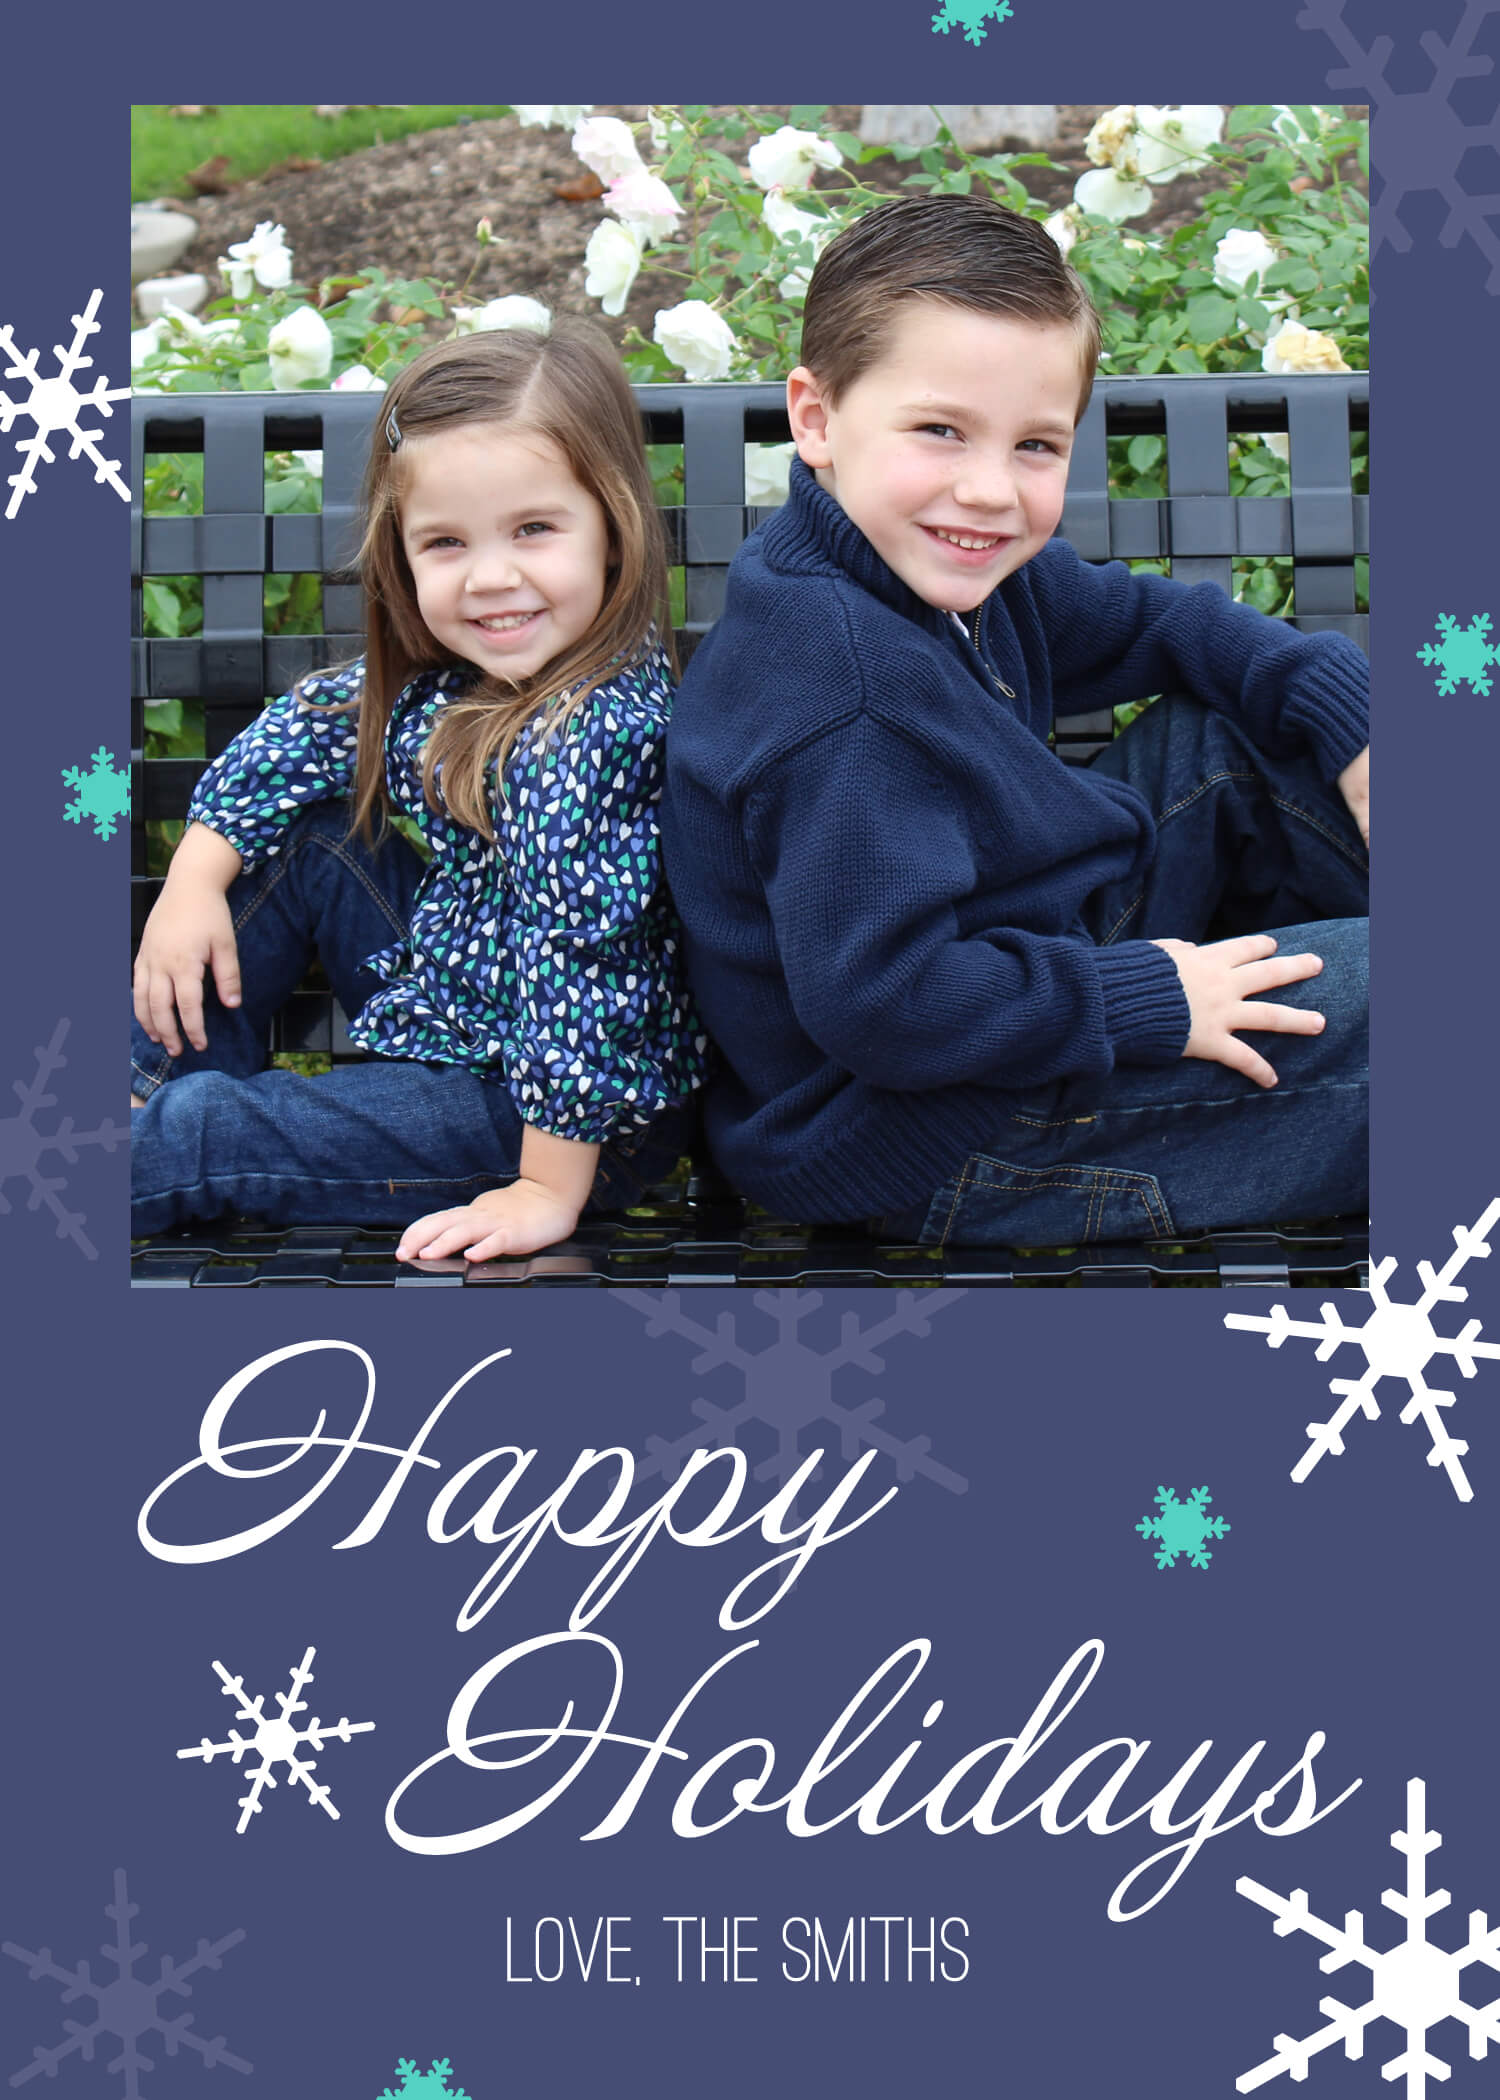 Holiday Photo Card & Pixlr Video Tutorial – Designer Blogs Throughout Free Holiday Photo Card Templates